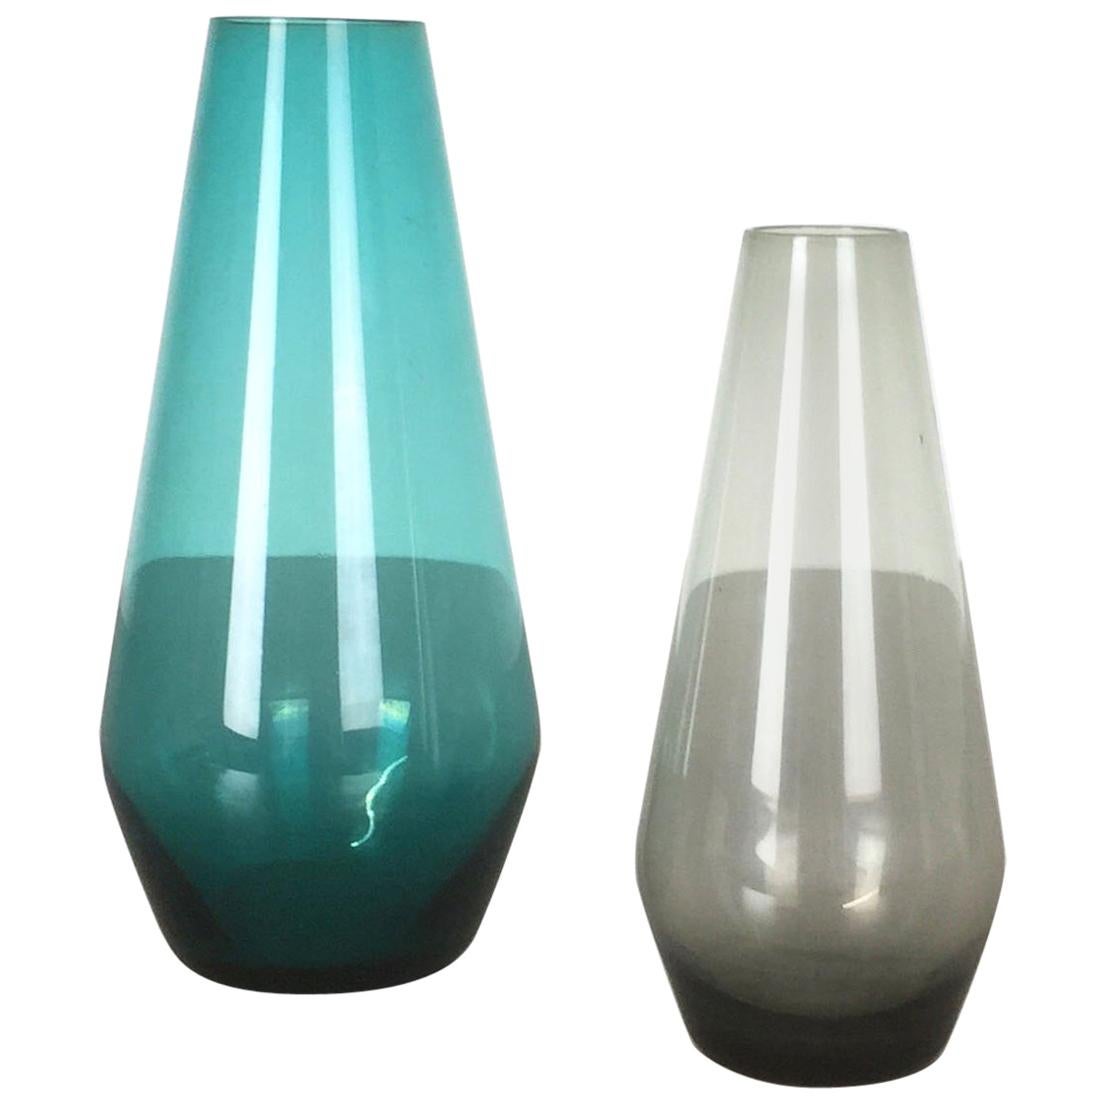 Vintage 1960s Set of Two Turmalin Vases by Wilhelm Wagenfeld for WMF, Germany